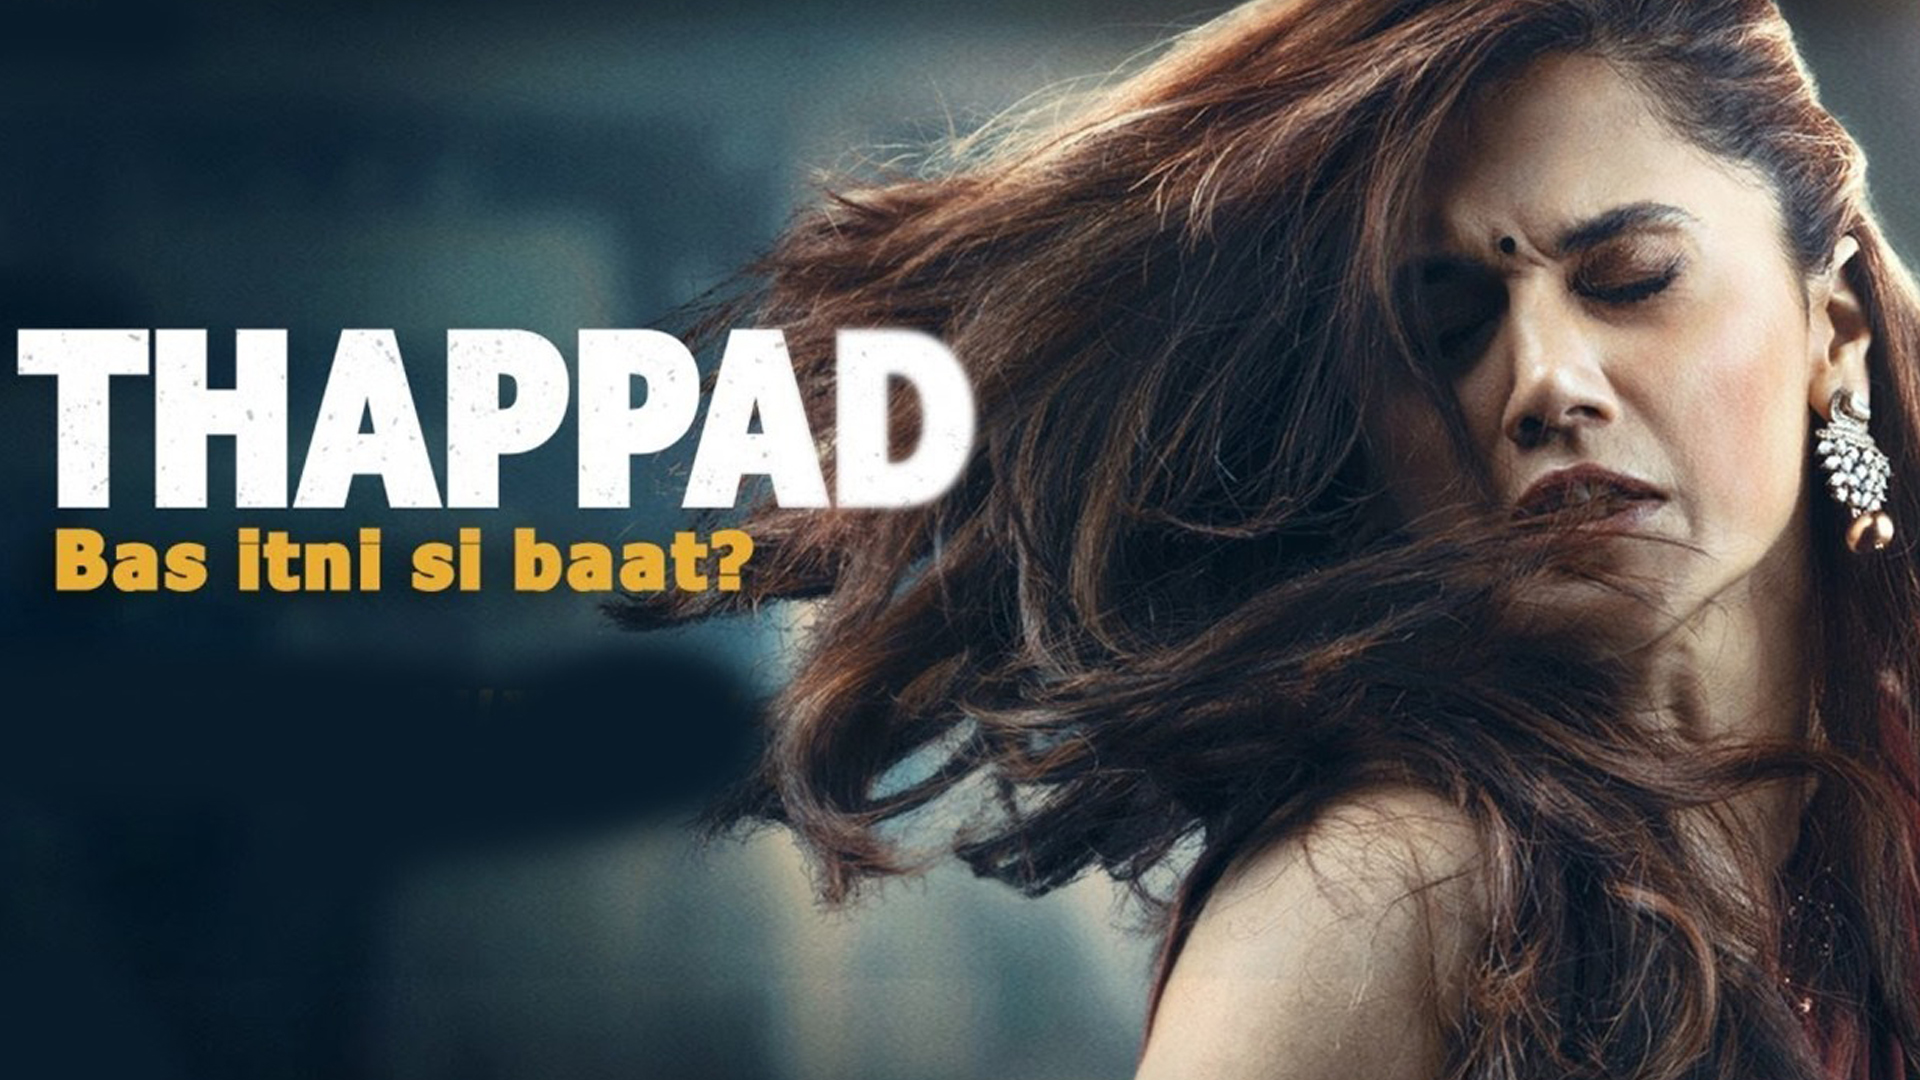 Thappad par disclaimer nahi? Taapsee Pannu and makers of Thappad ask a pertinent question thorough a unique Change.org petition